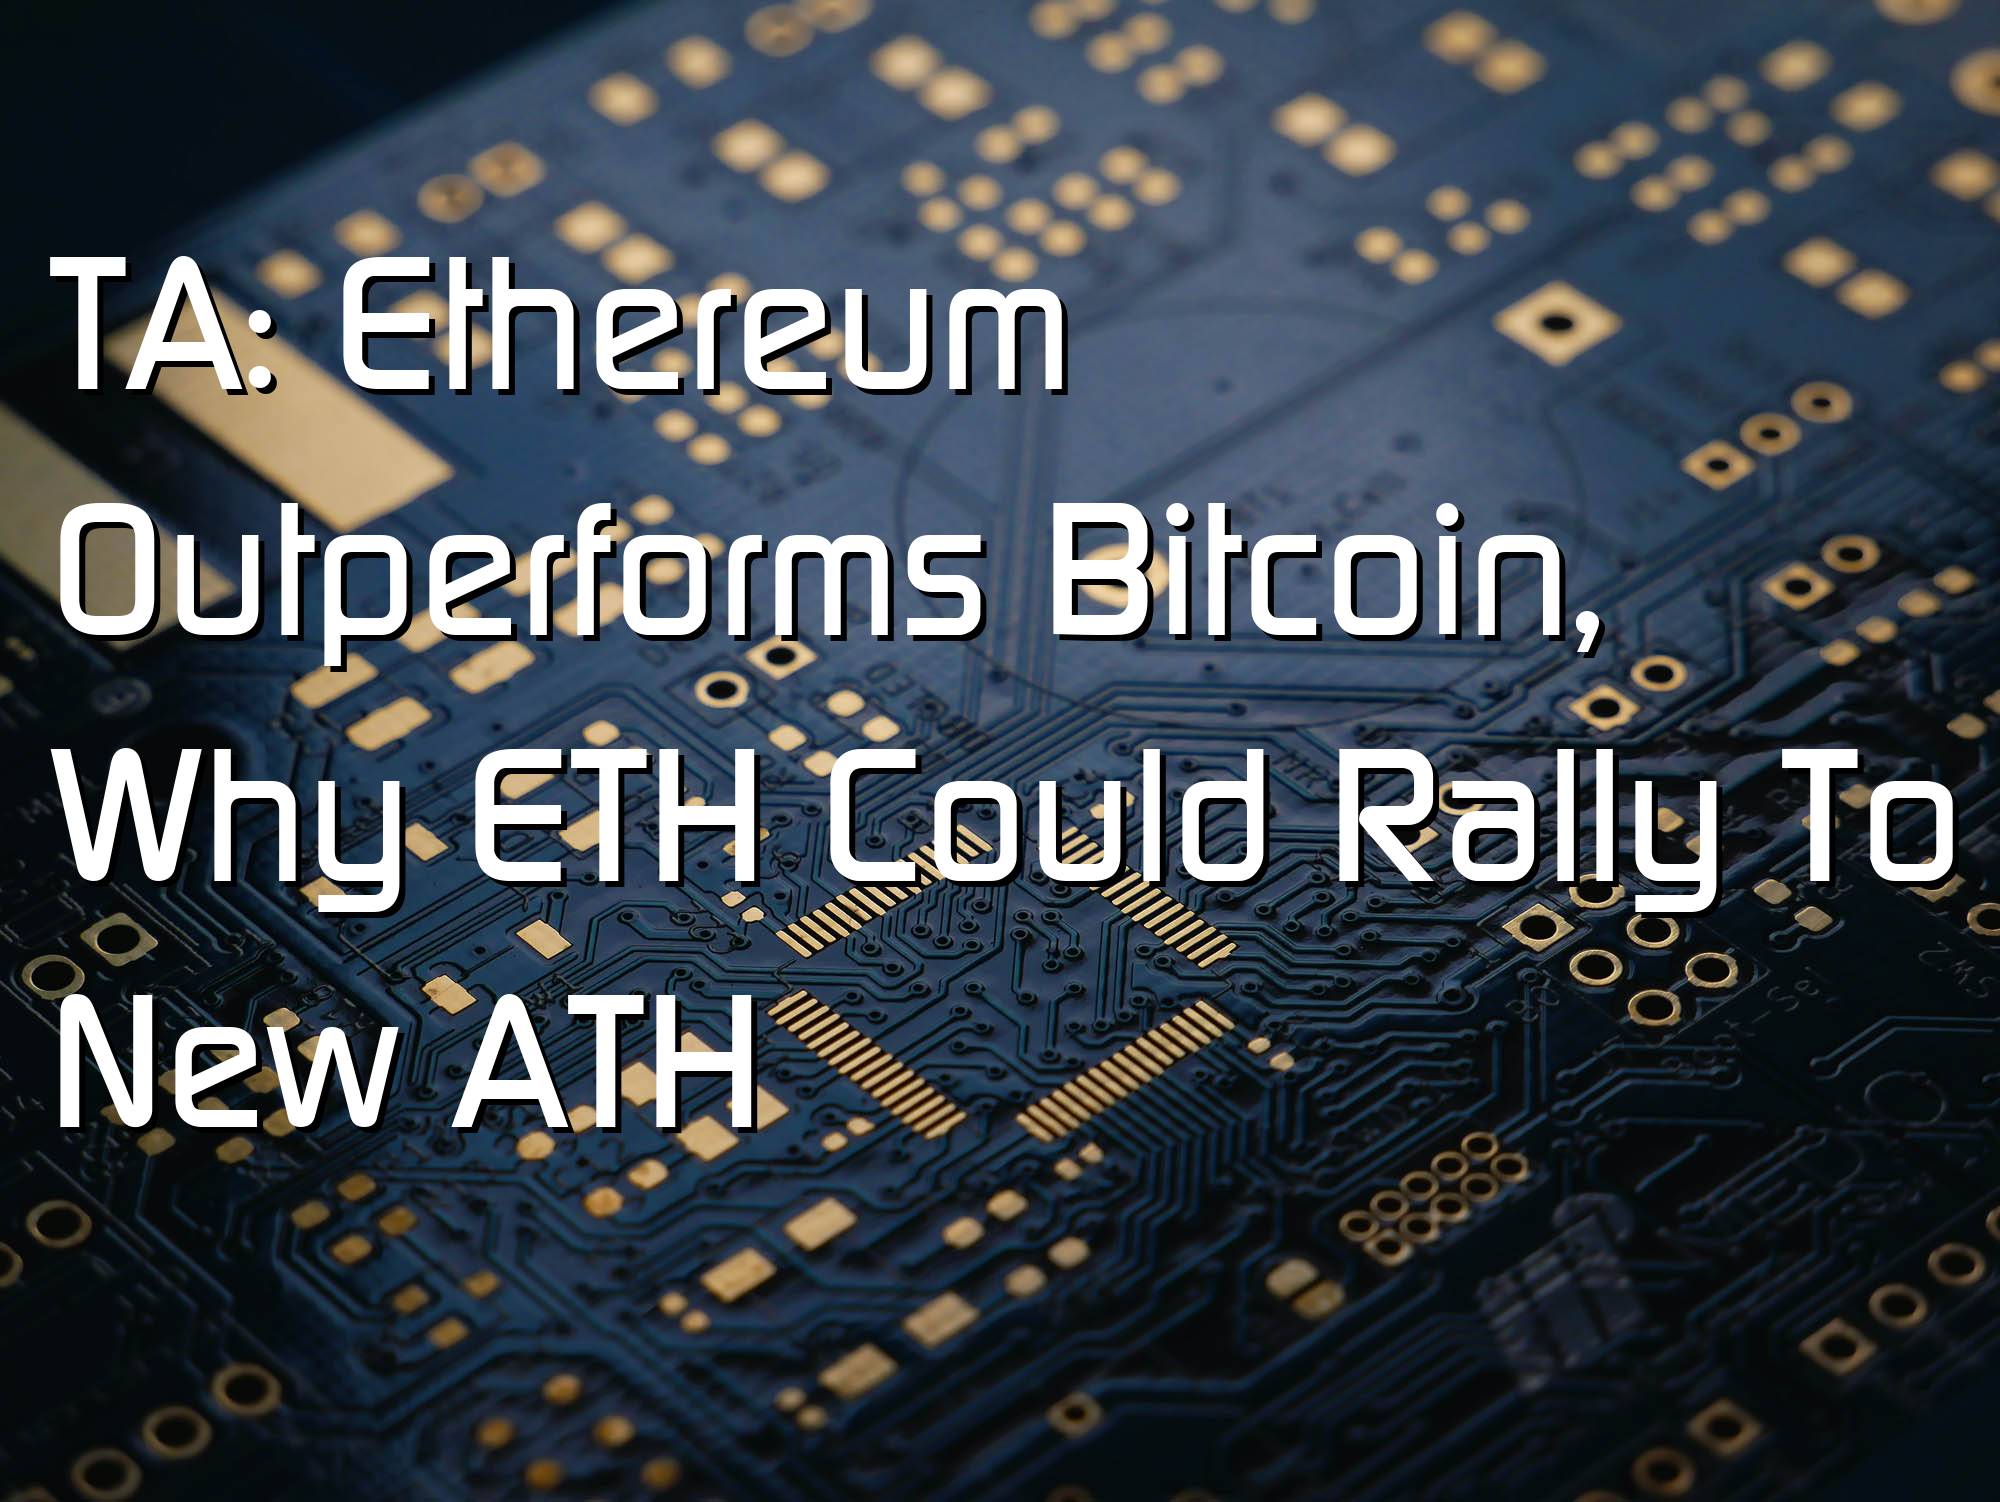 @$60825: TA: Ethereum Outperforms Bitcoin, Why ETH Could Rally To New ATH